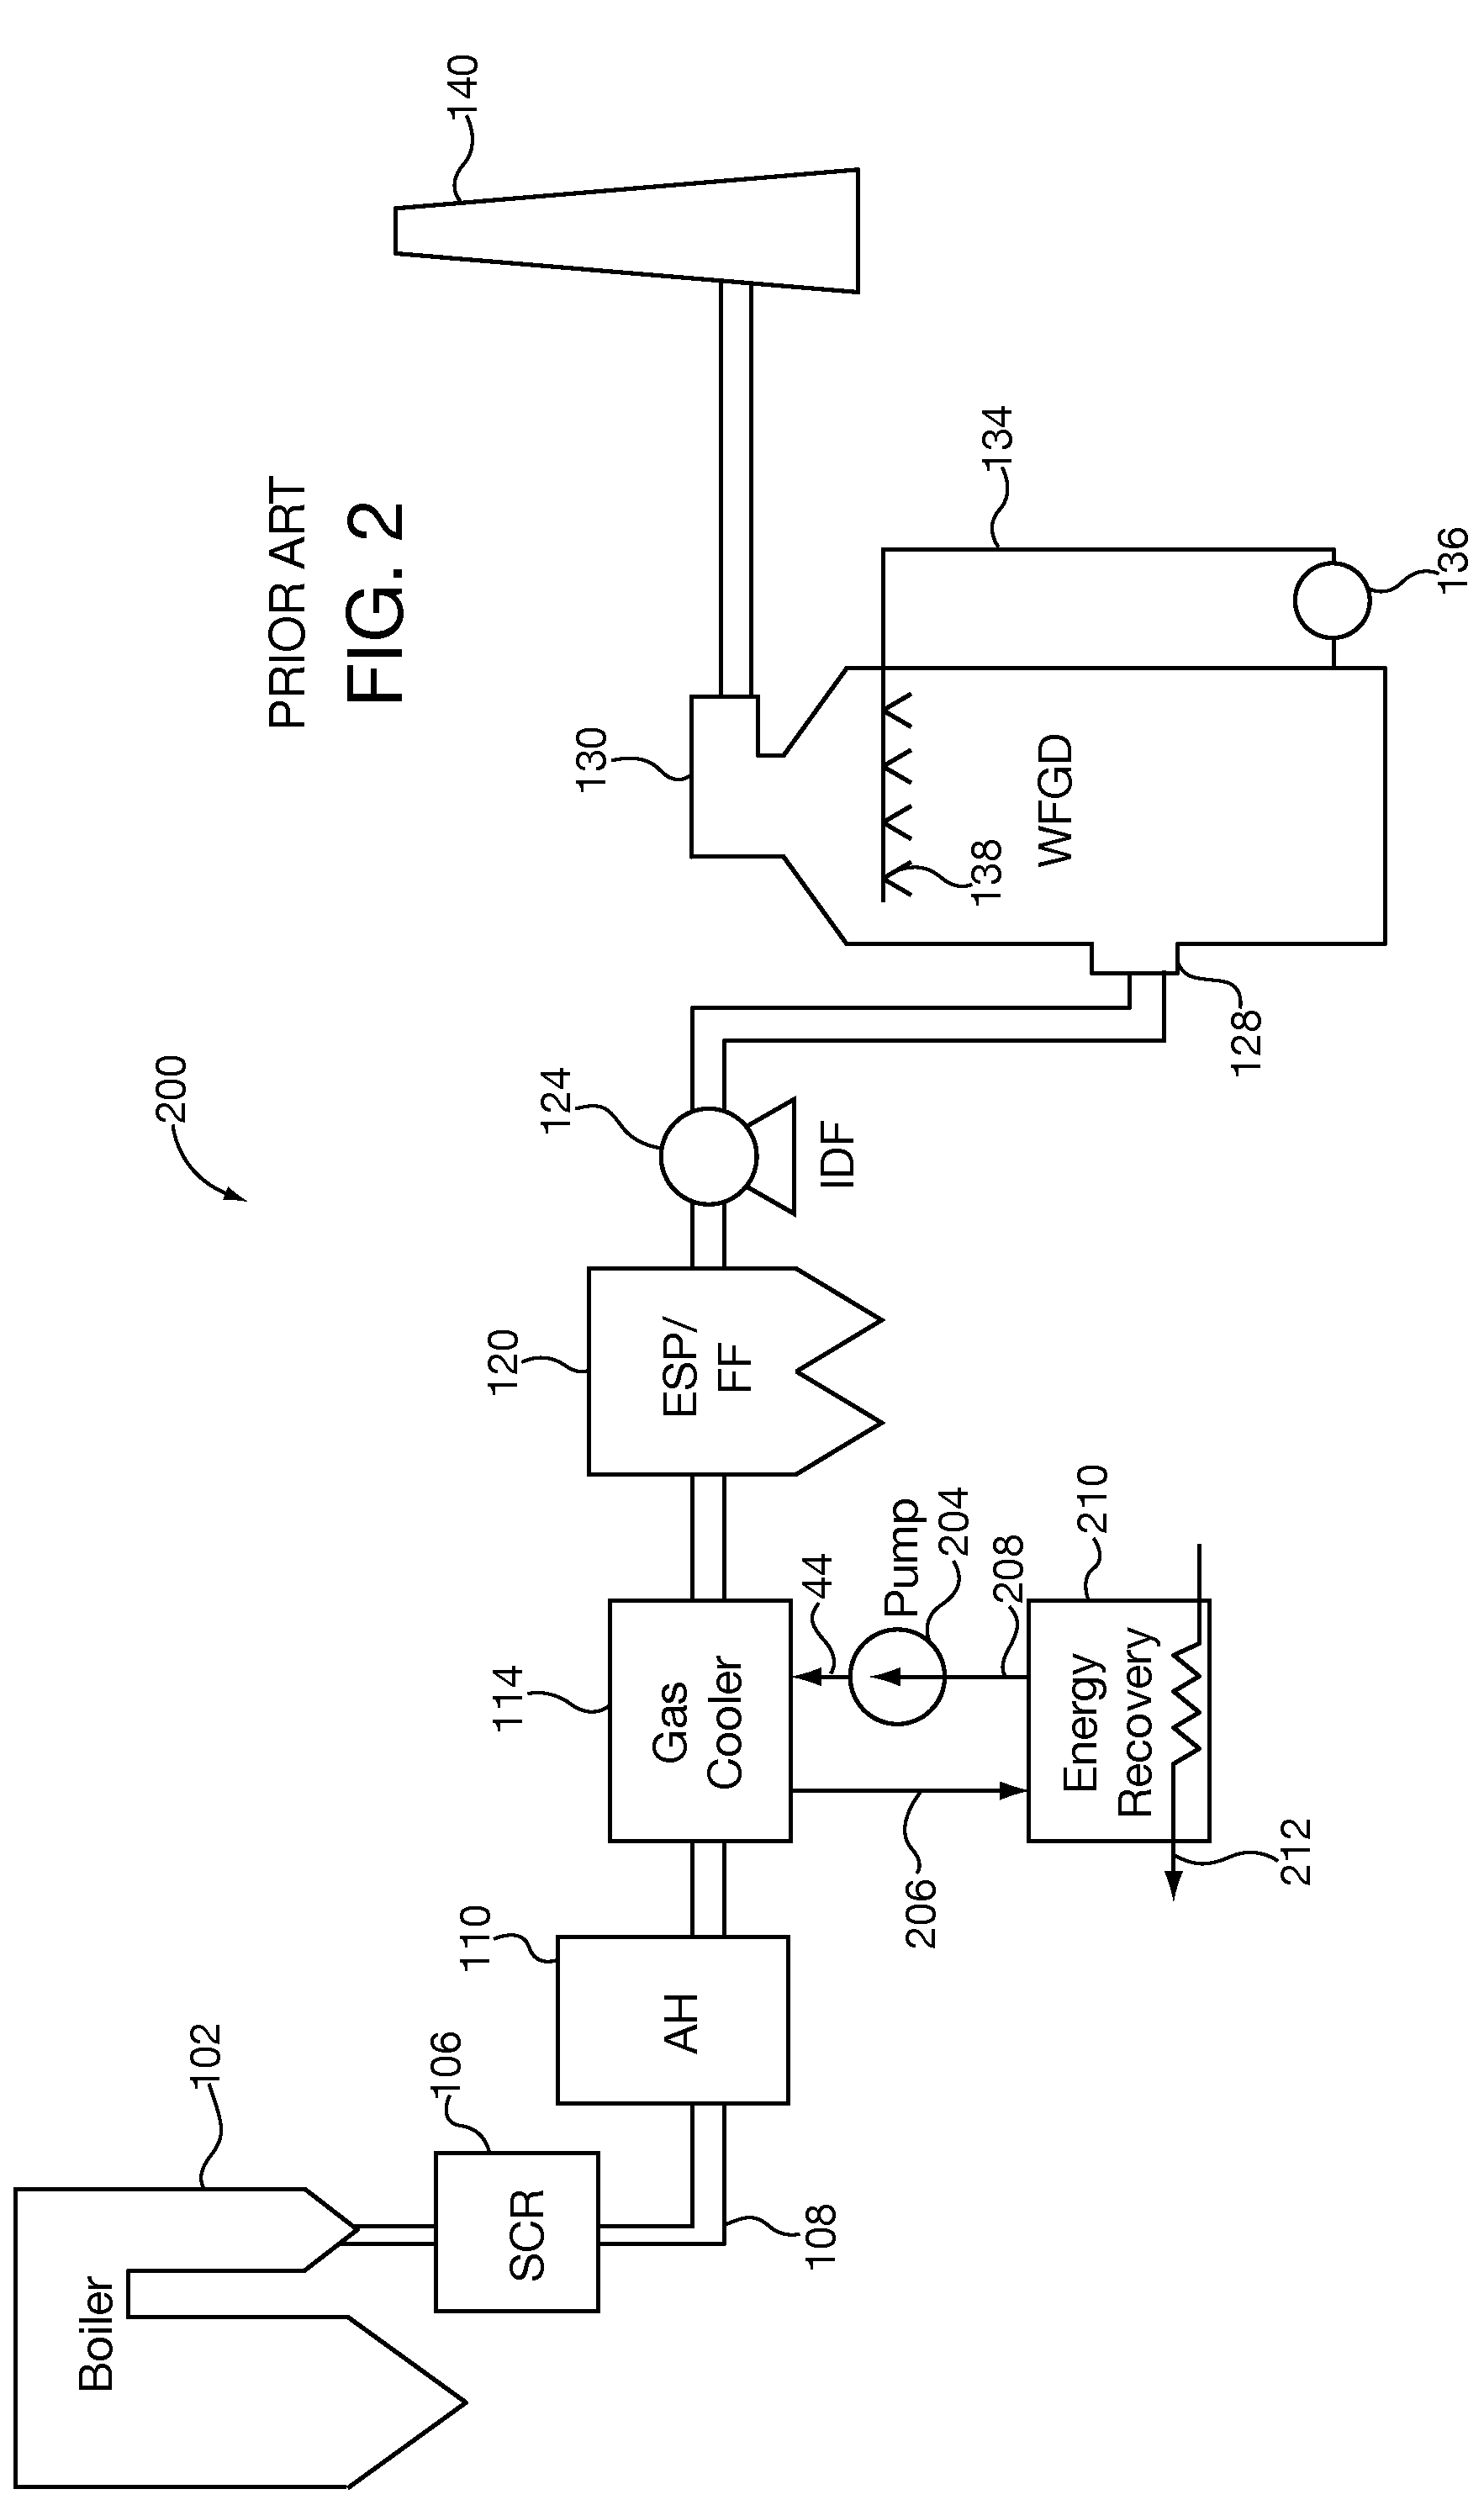 Methods and apparatus for performing flue gas pollution control and/or energy recovery